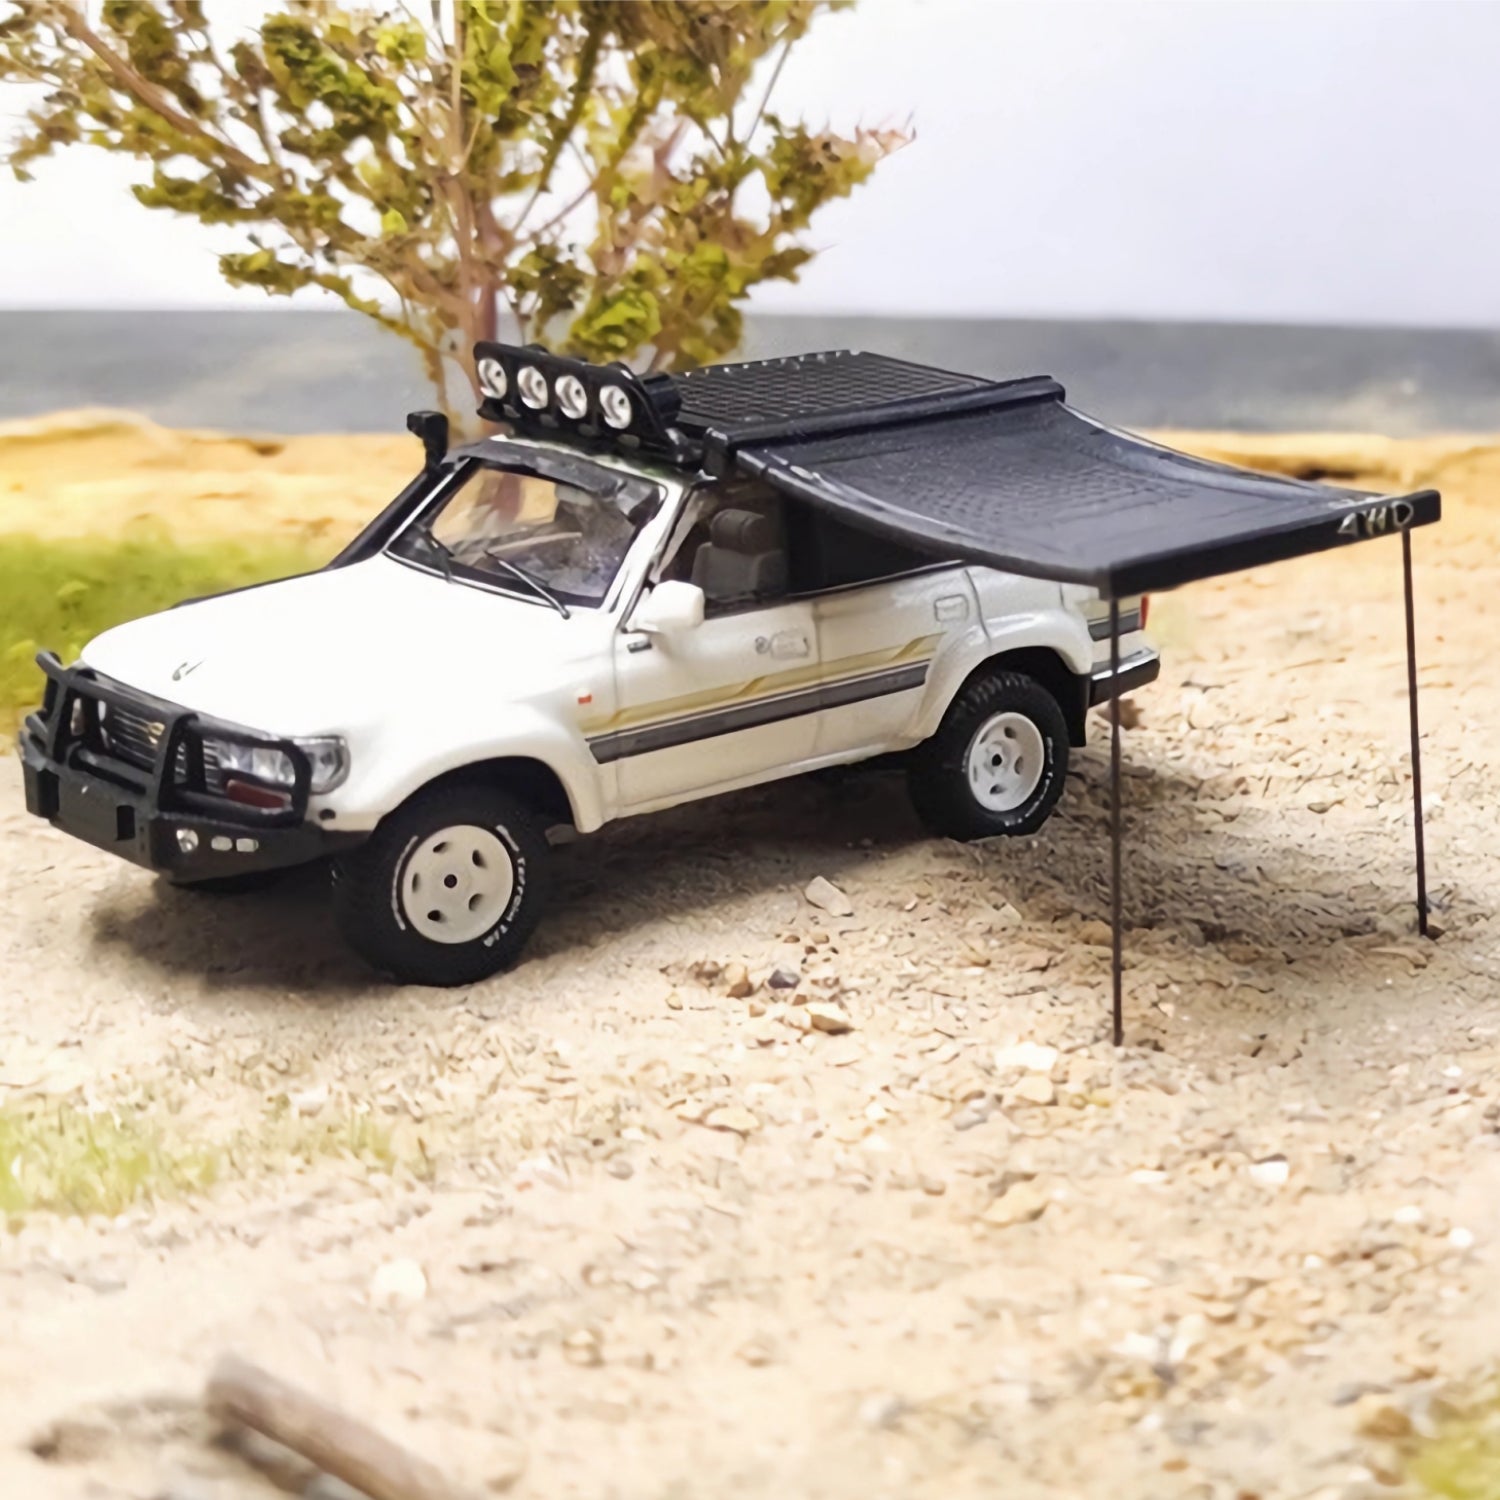 1/64 Roof Rack Awning